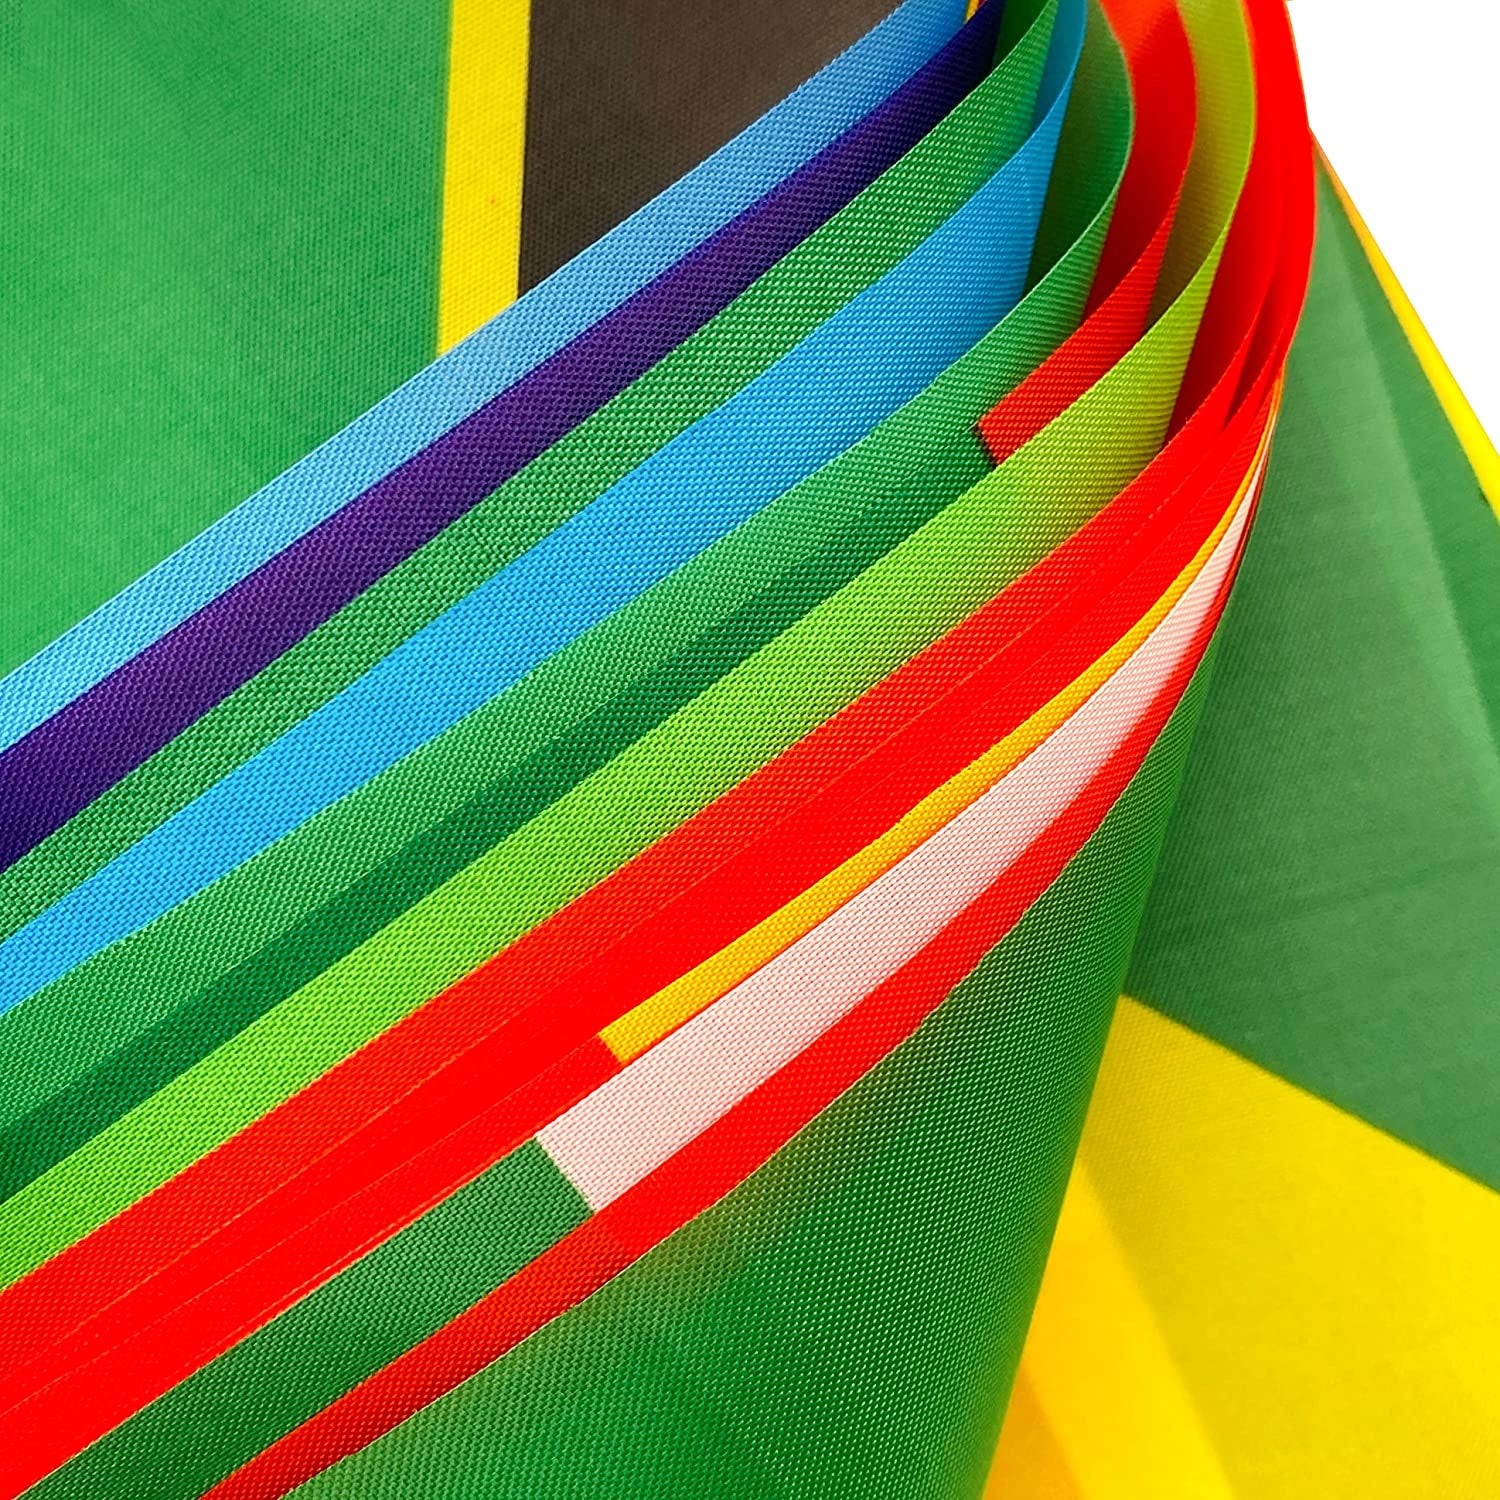 54 Africa African Countries Flags Banner String Set,65 Feet